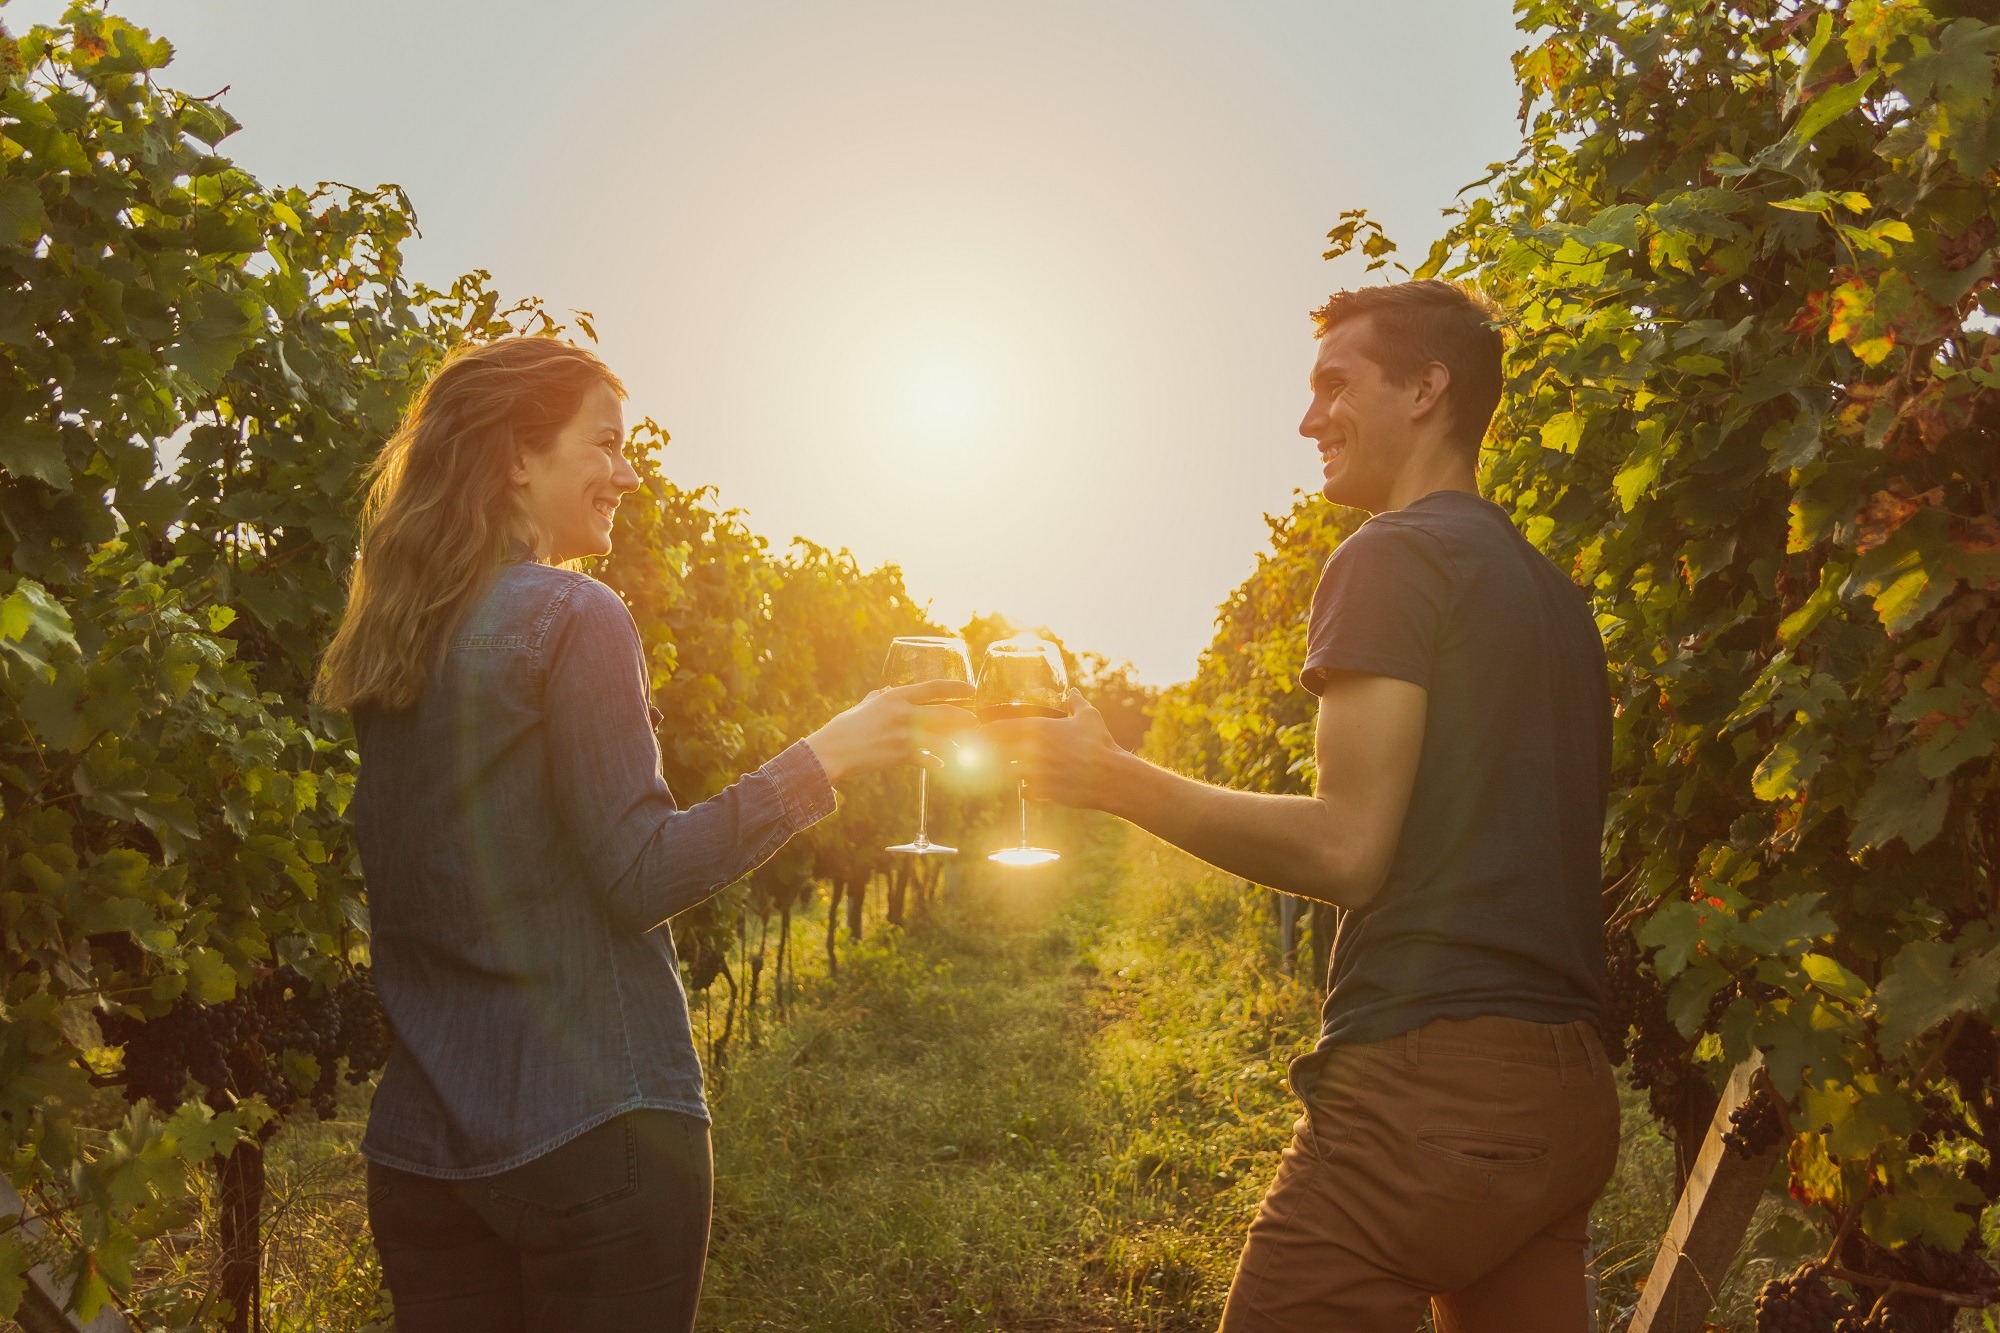 woman with denim shirt and man with t-shirt drinking red wine during sunset. grapevine in Ticino.